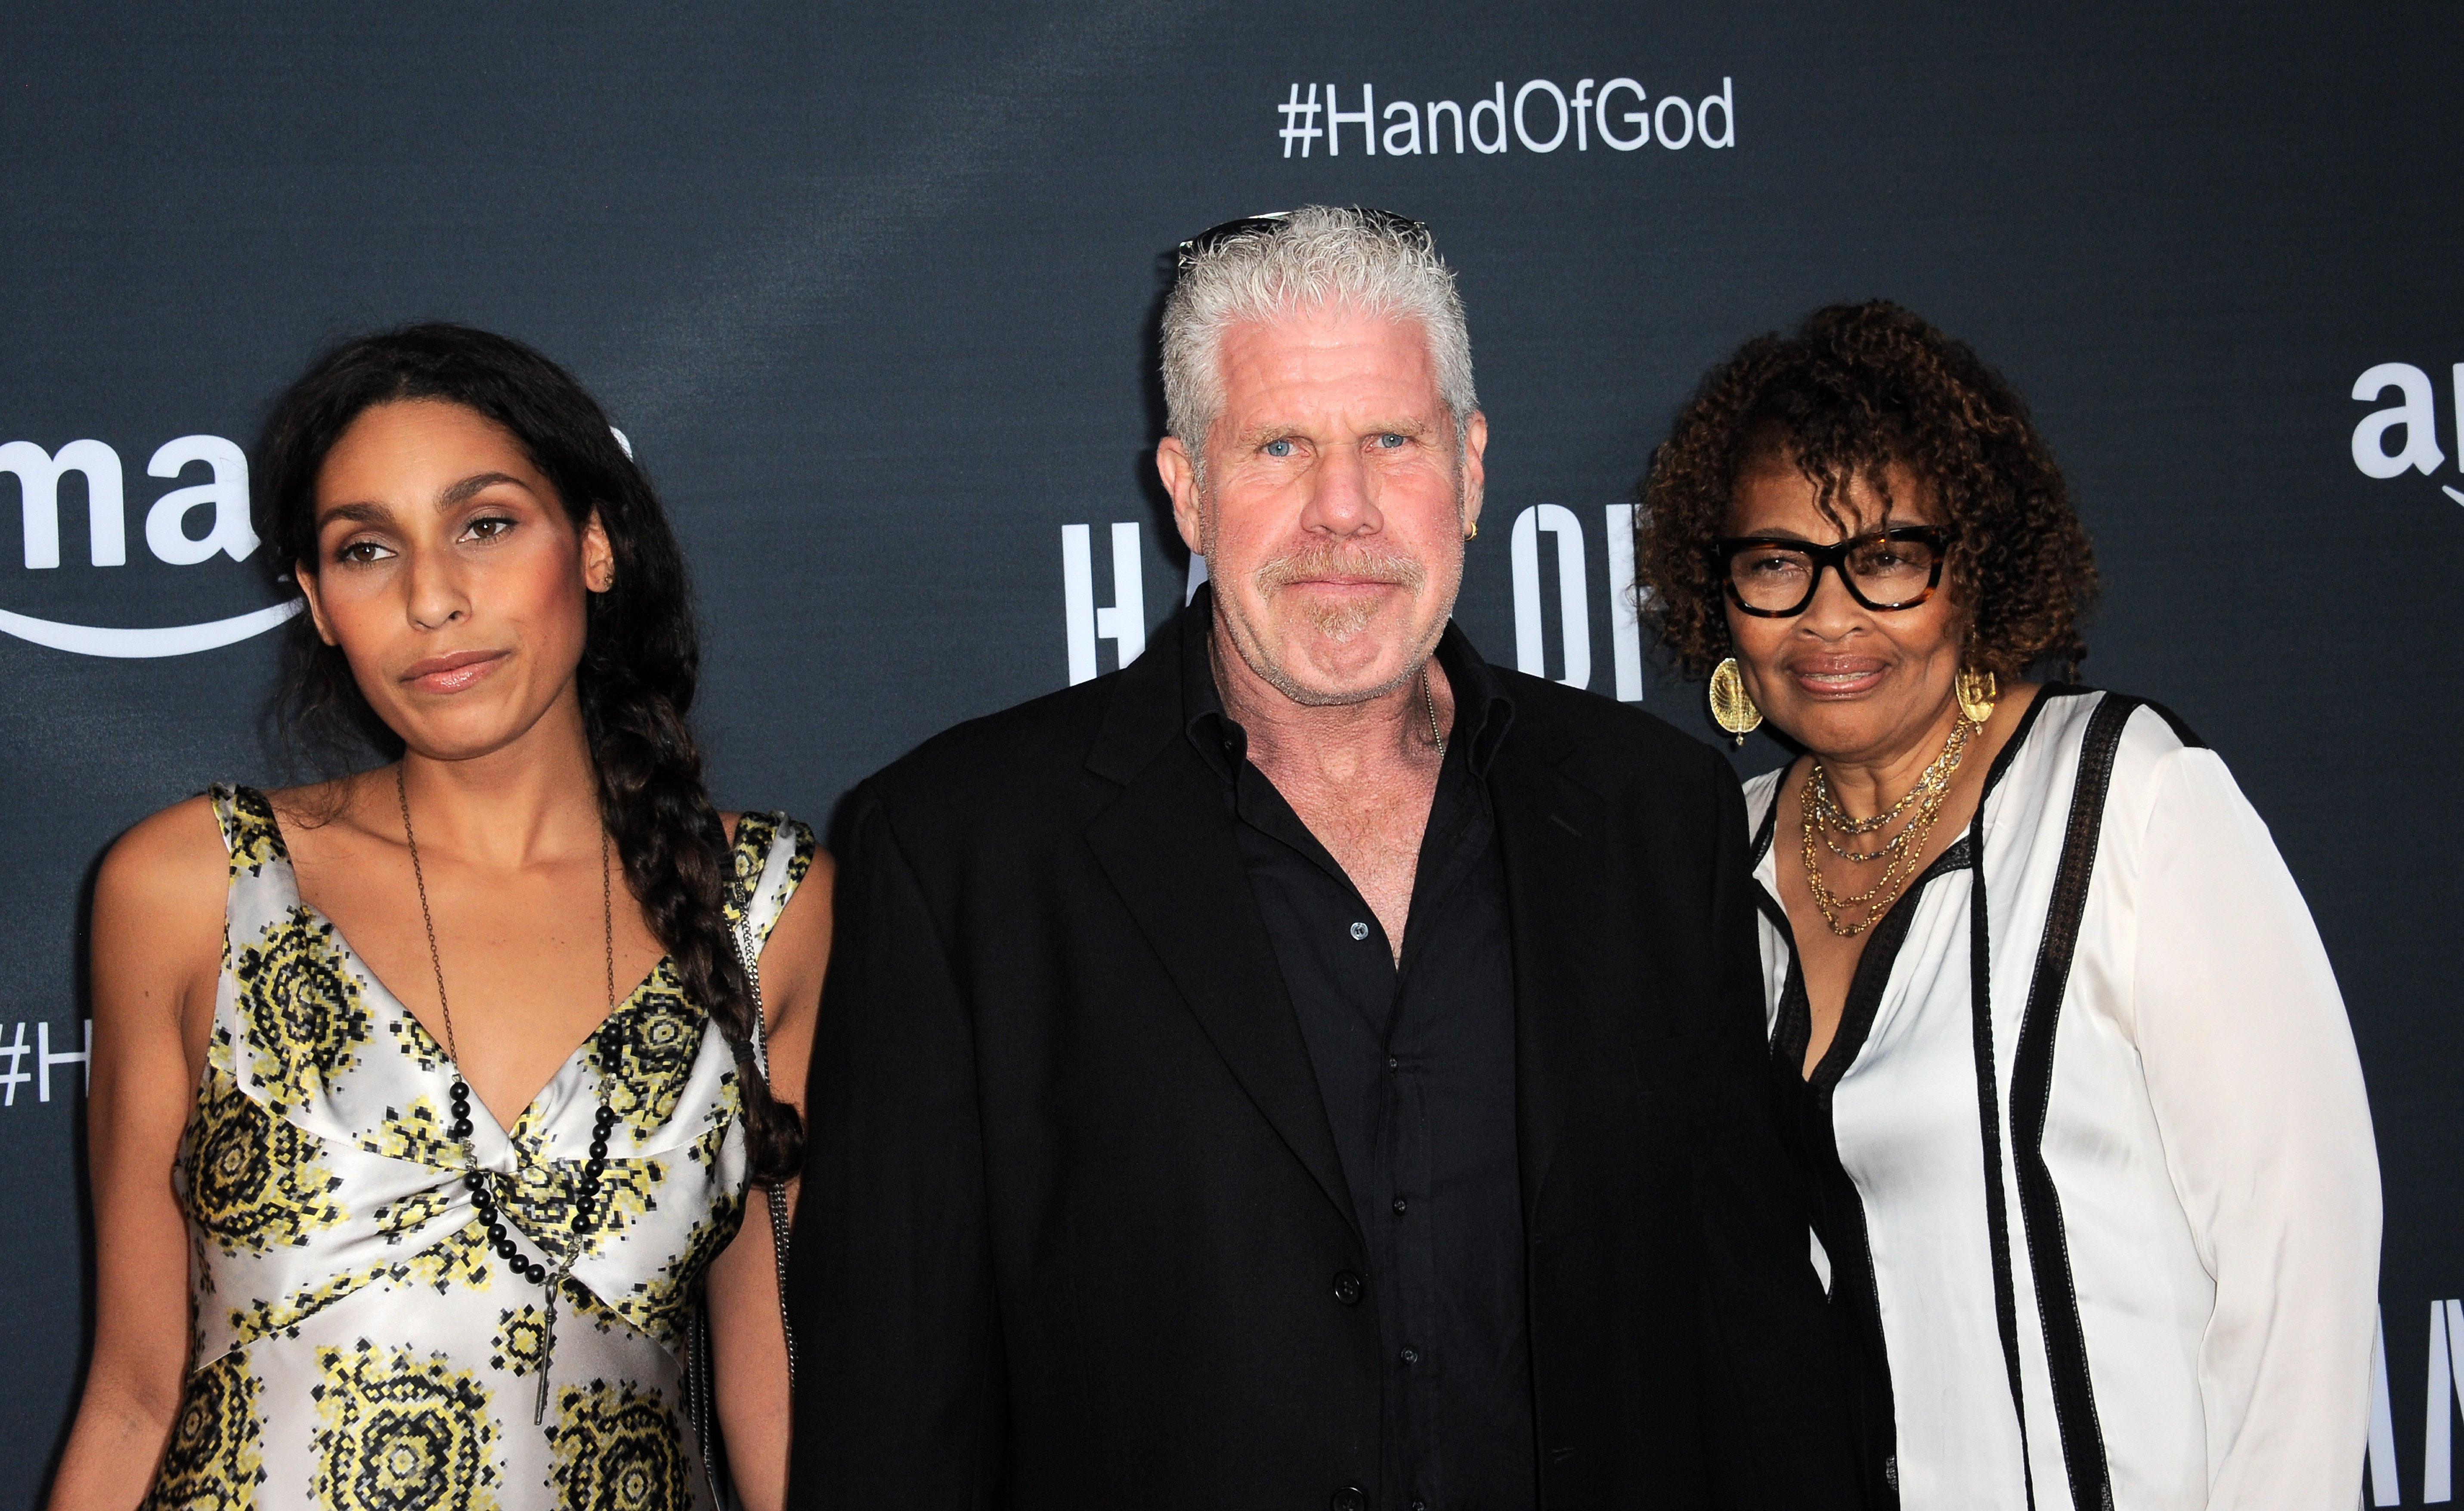 Blake Perlman, Ron Perlman and Opal Stone arrive for the Premiere Of Amazon's Series "Hand Of God." | Source: Getty Images